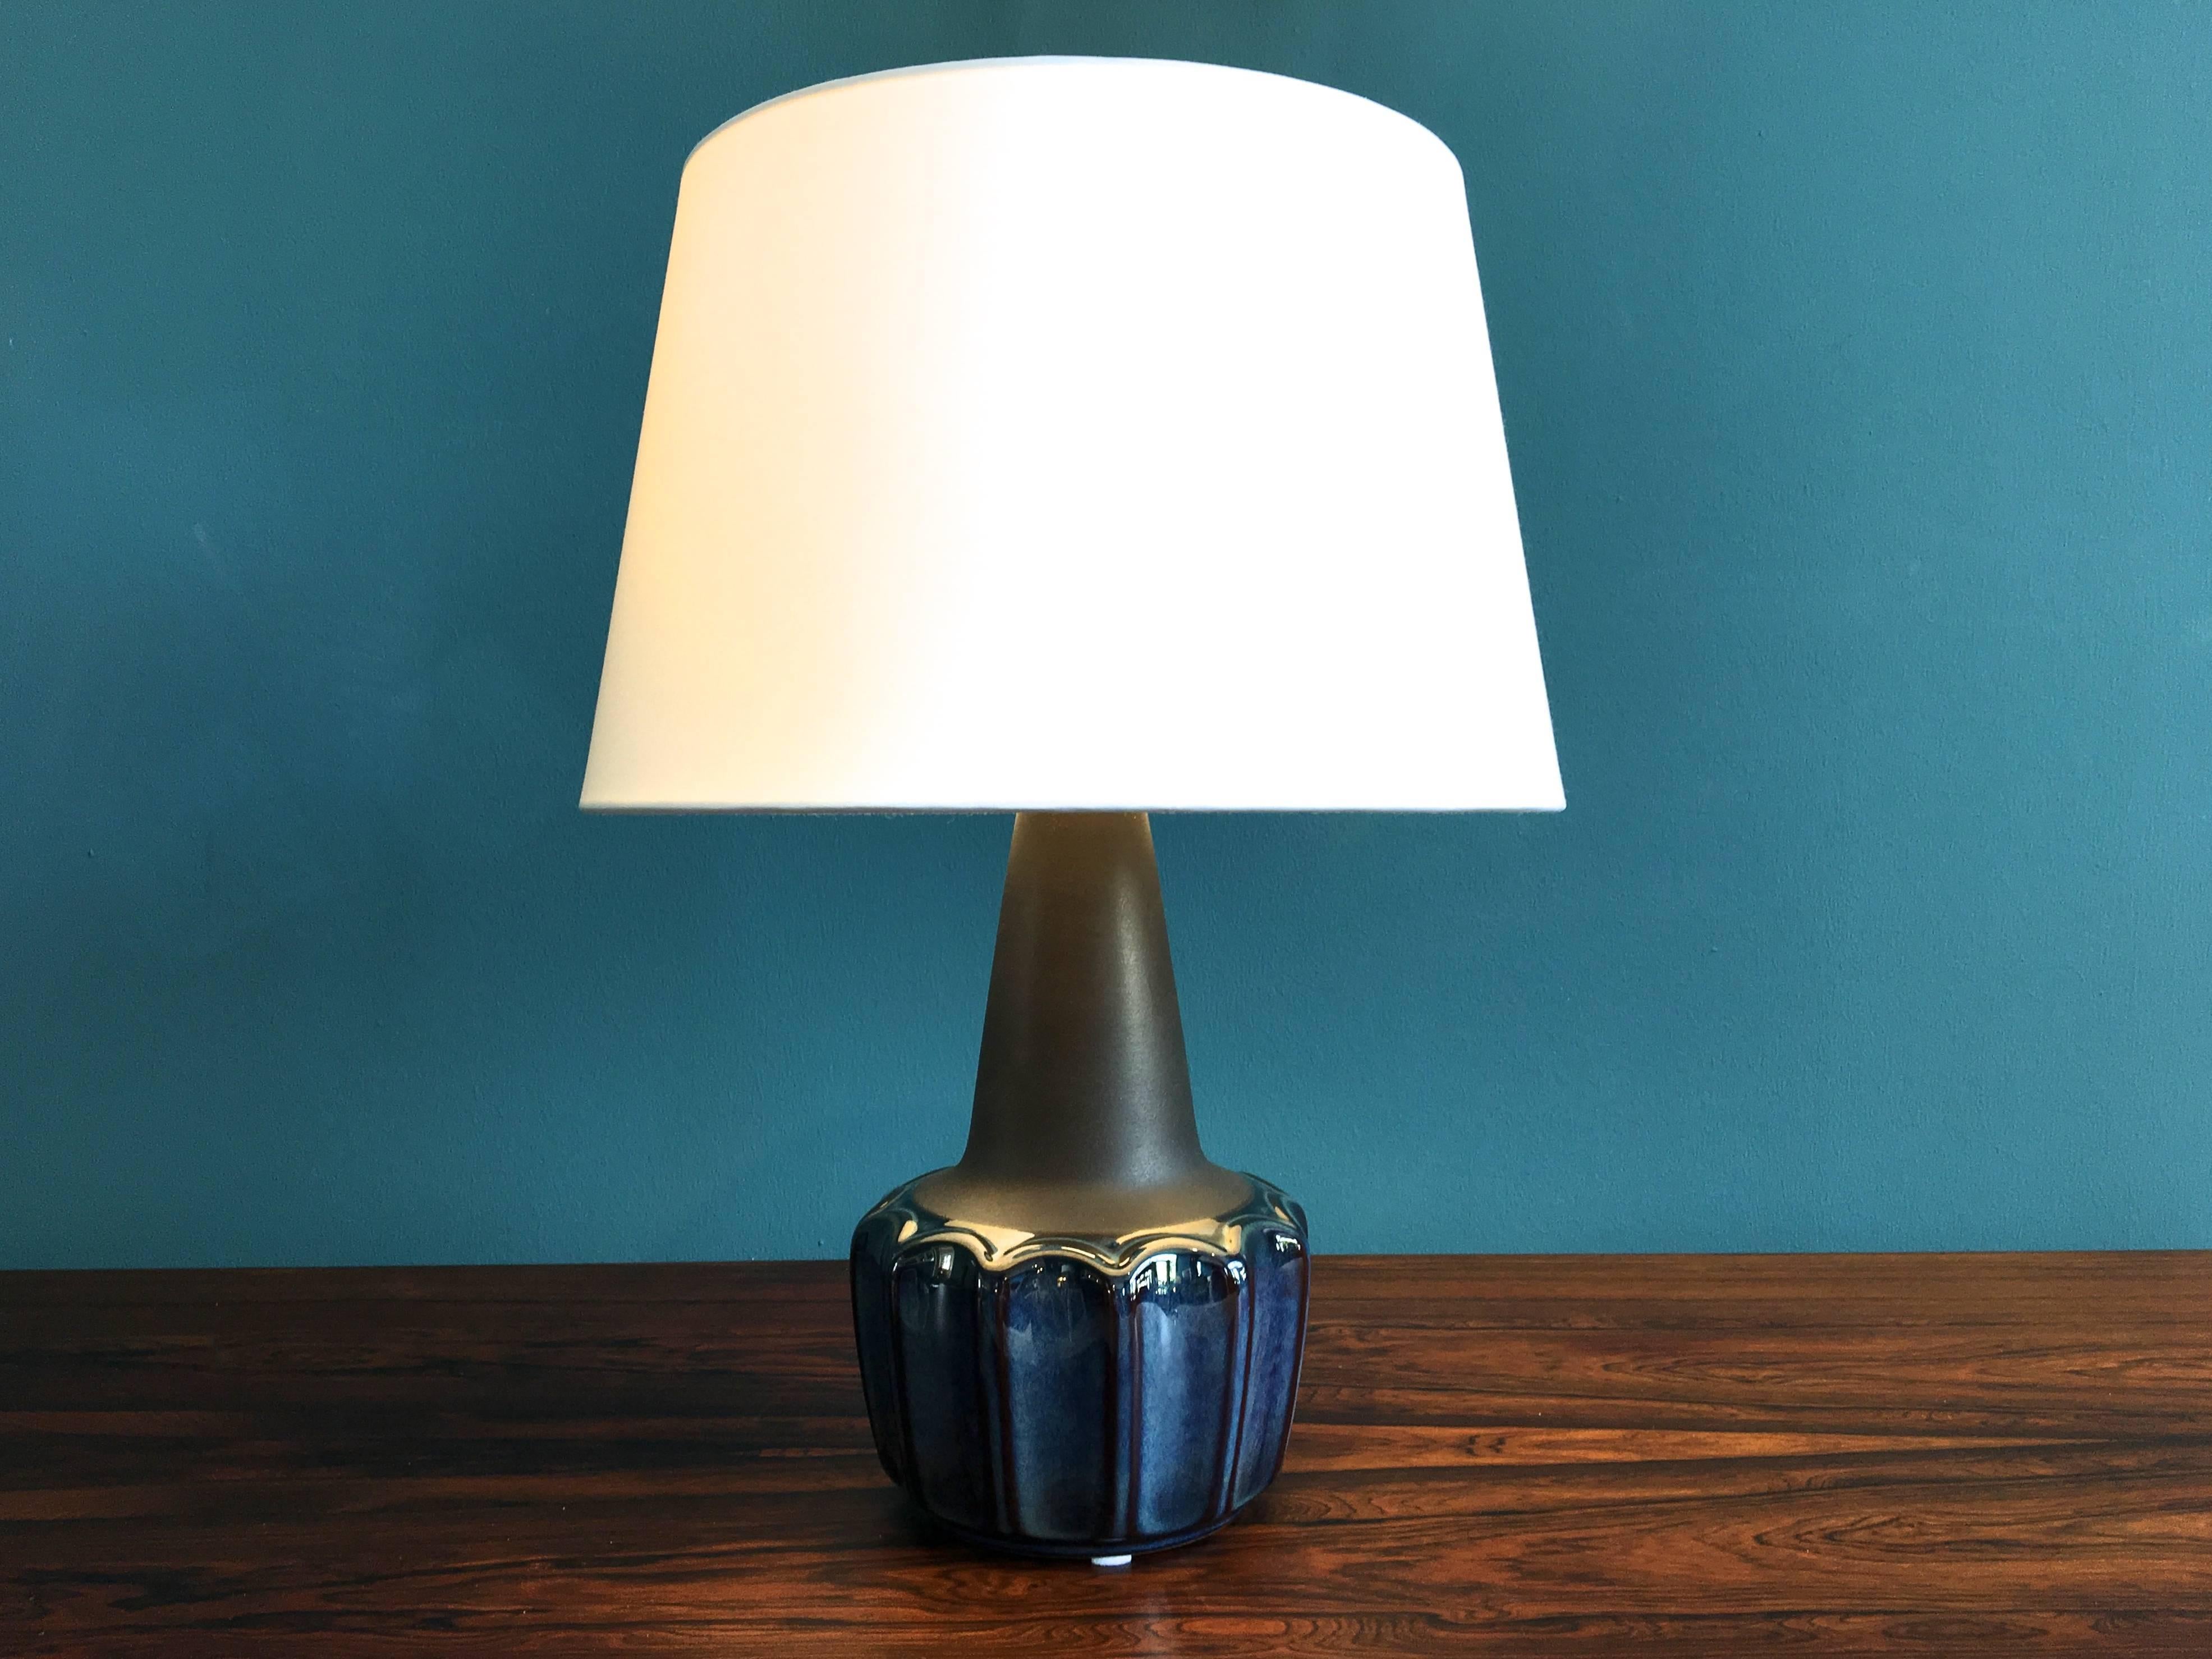 This ceramic table lamp was designed by Einar Johansen and produced by Soholm Stentoj in Denmark in the 1960s. It is made of stoneware. The bottom part of the lamp features a glazed ceramic finish. The lamp has been rewired with switch, new European